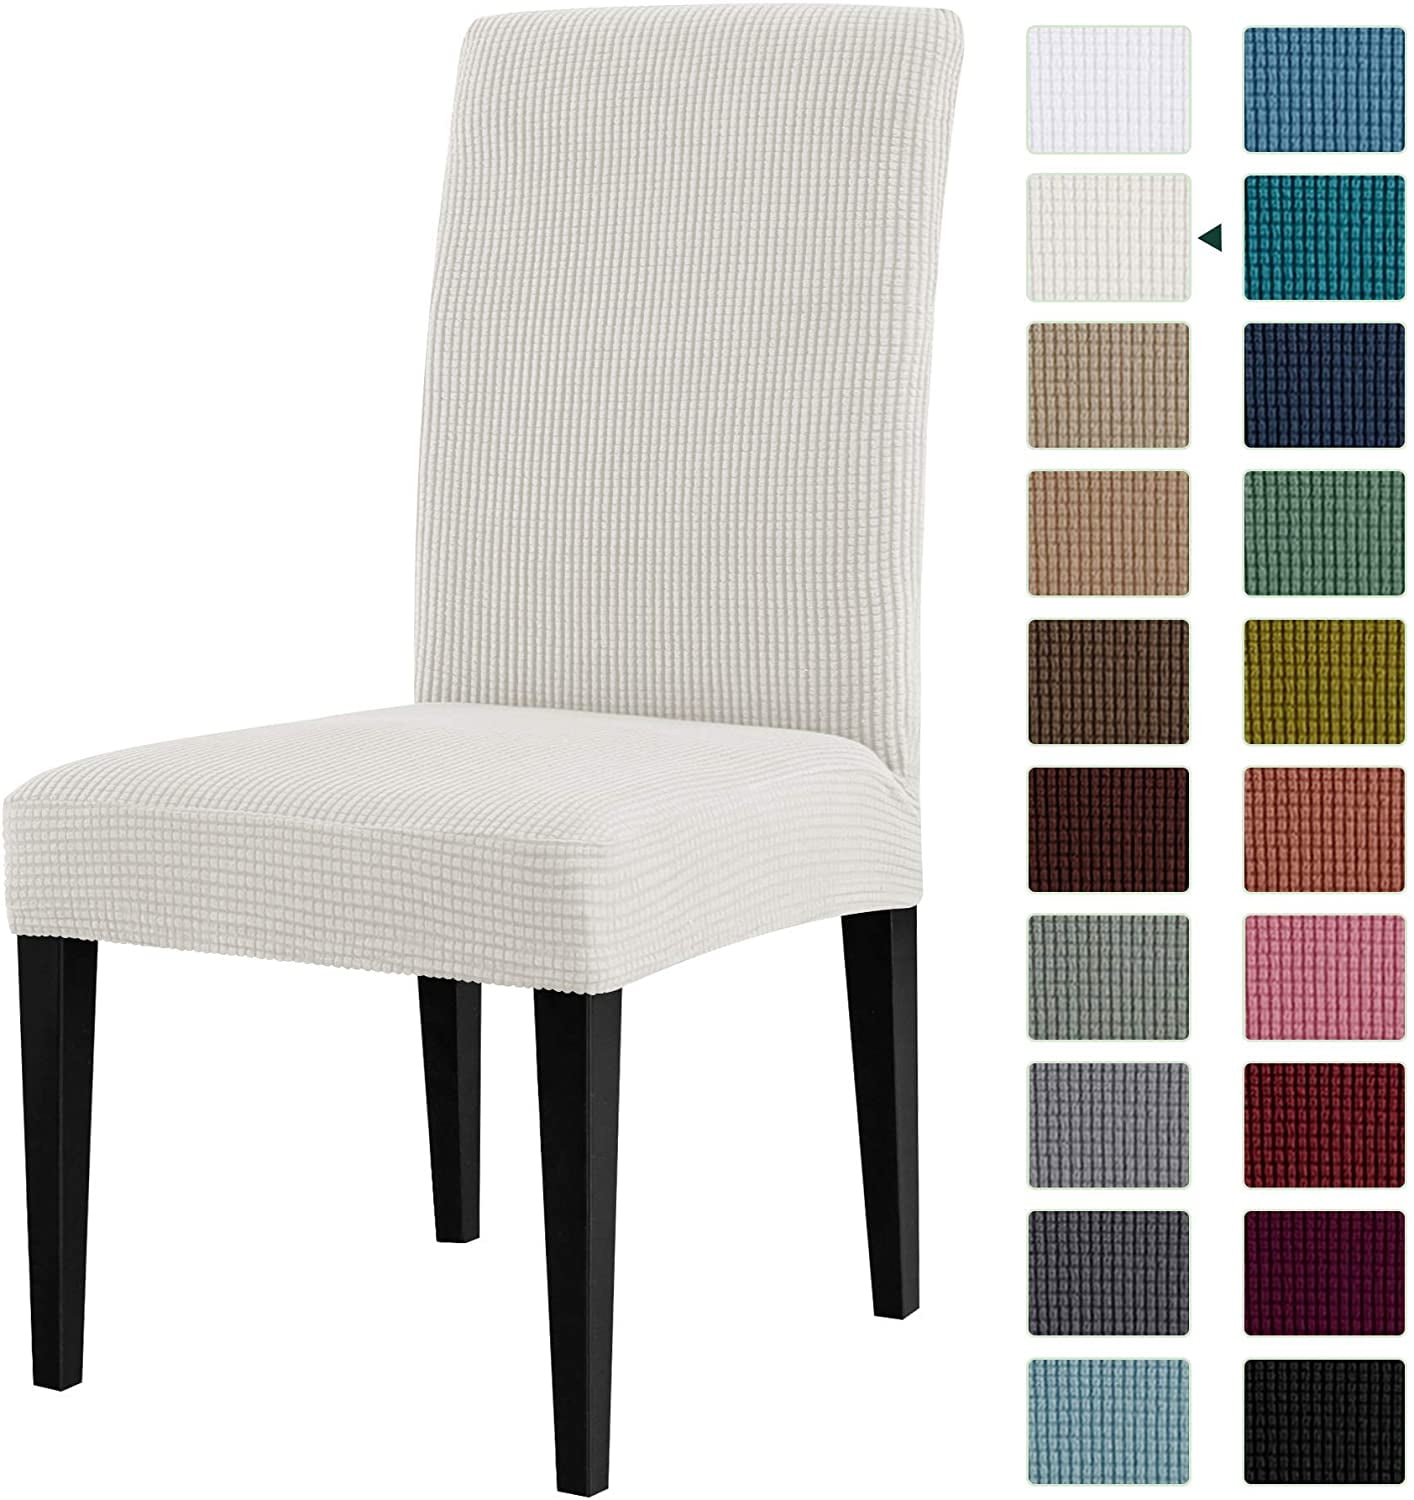 Details about   1/4/6pc Stretch Spandex Dining Room Printed Chair Covers Slipcovers Hom 